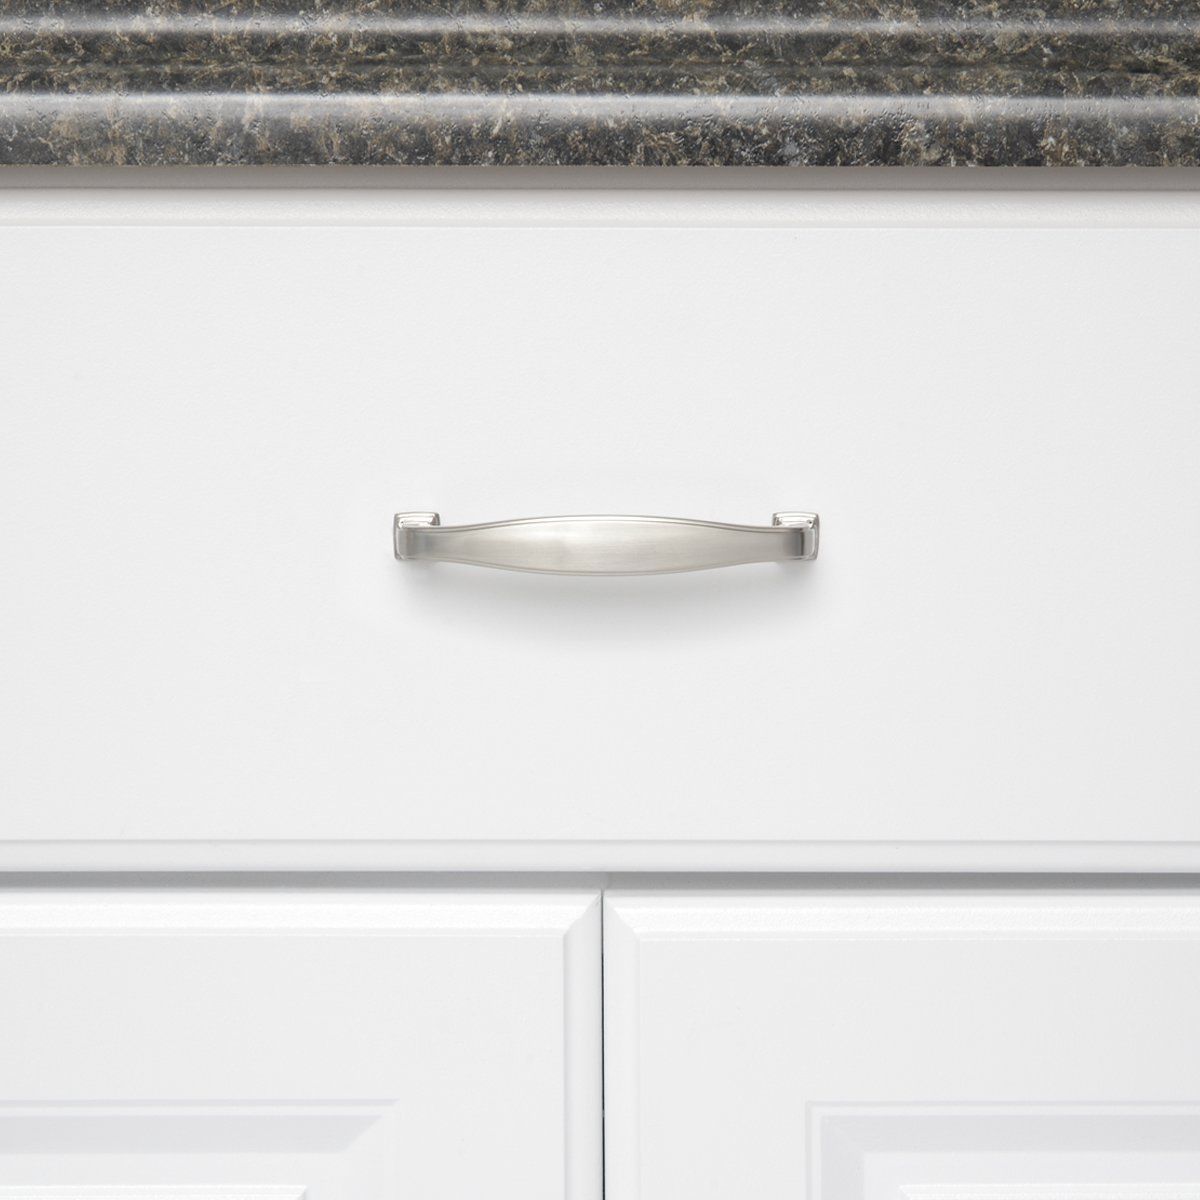 Silverline P2046 Cabinet Pull Handle CC:96 mm ~3-3/16" Transitional Style - amerfithardware